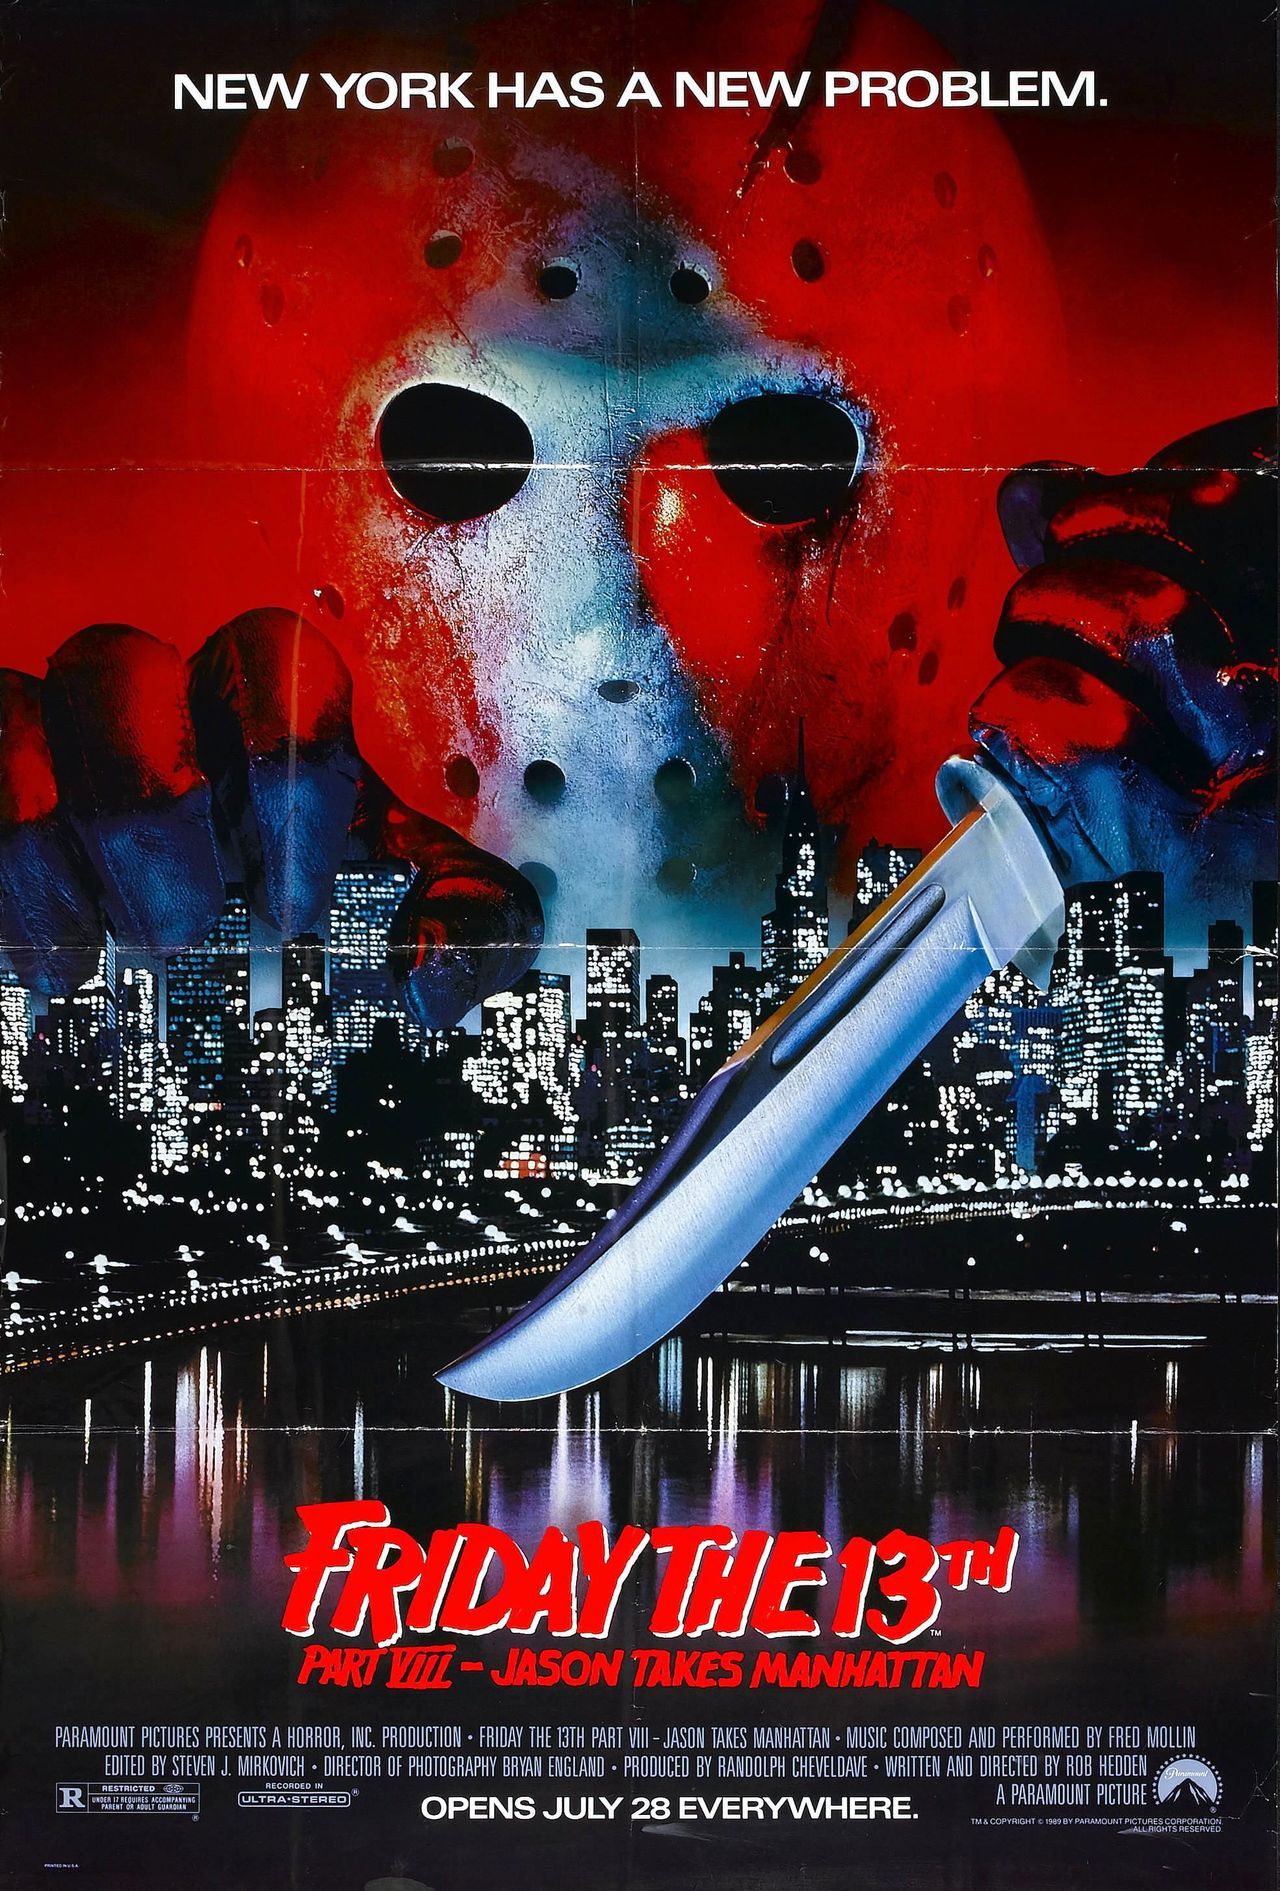 BACK IN THE DAY | 7/28/89| The movie, Friday The 13th: Jason Takes Manhattan, is